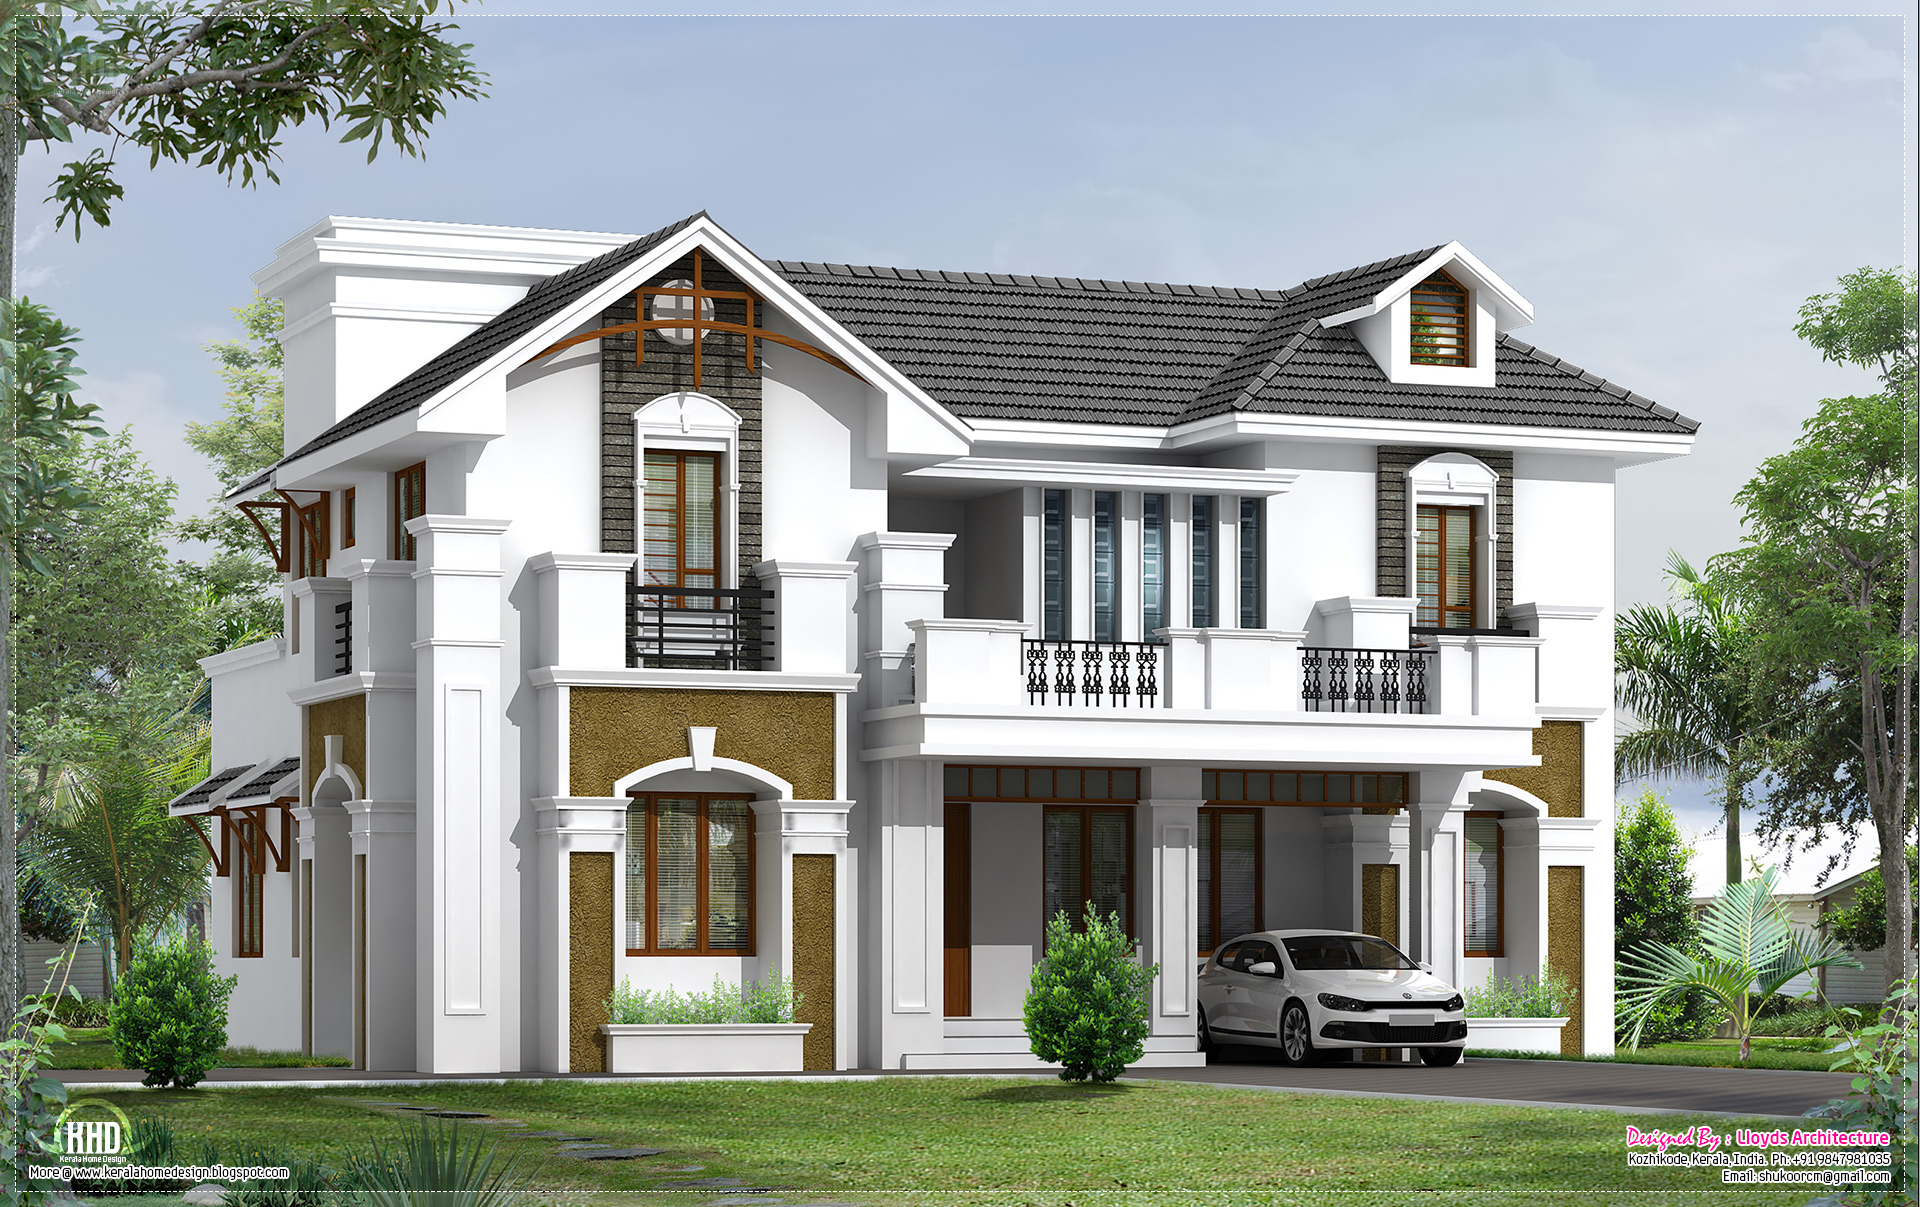  3d  view  of 2200 square feet villa Kerala home  design and 